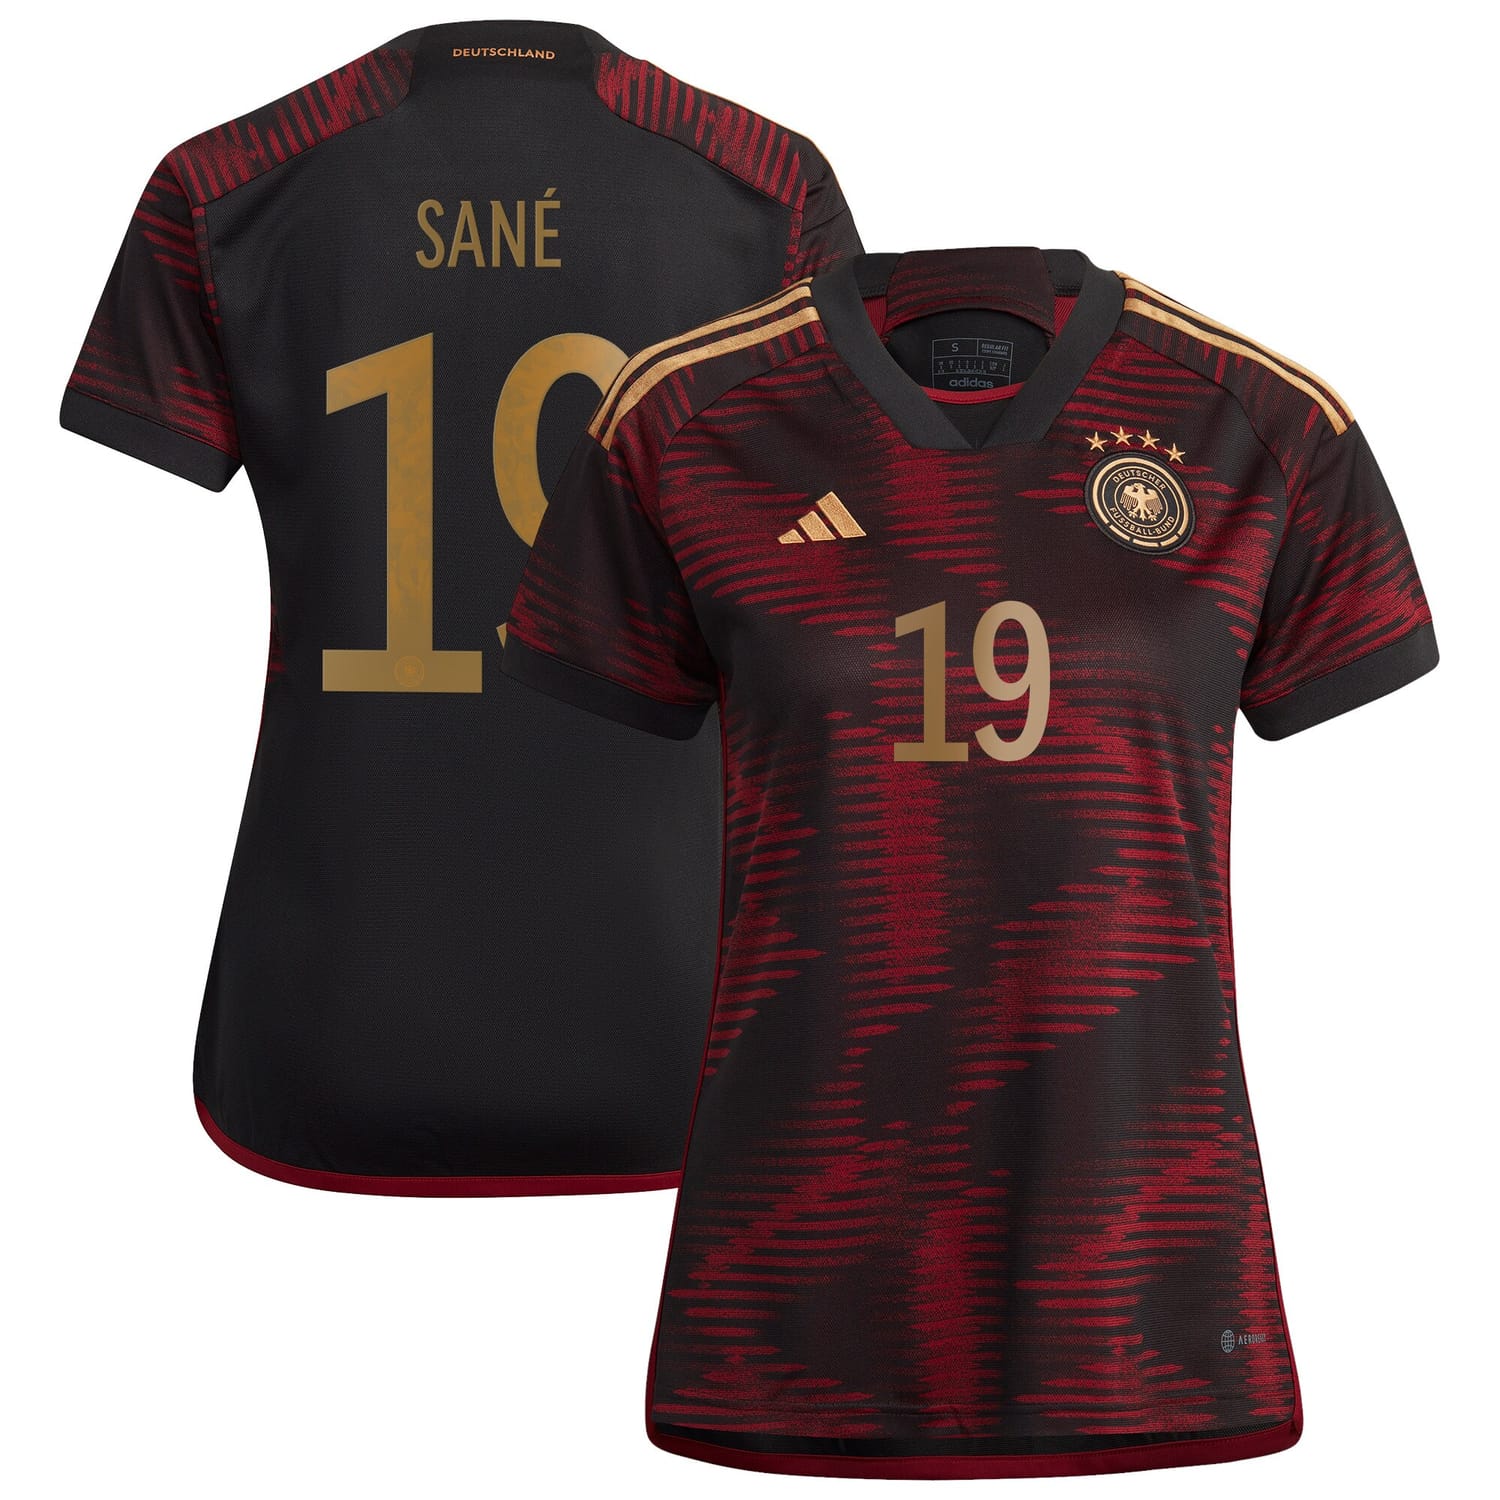 Germany National Team Away Jersey Shirt player Leroy Sané 19 printing for Women